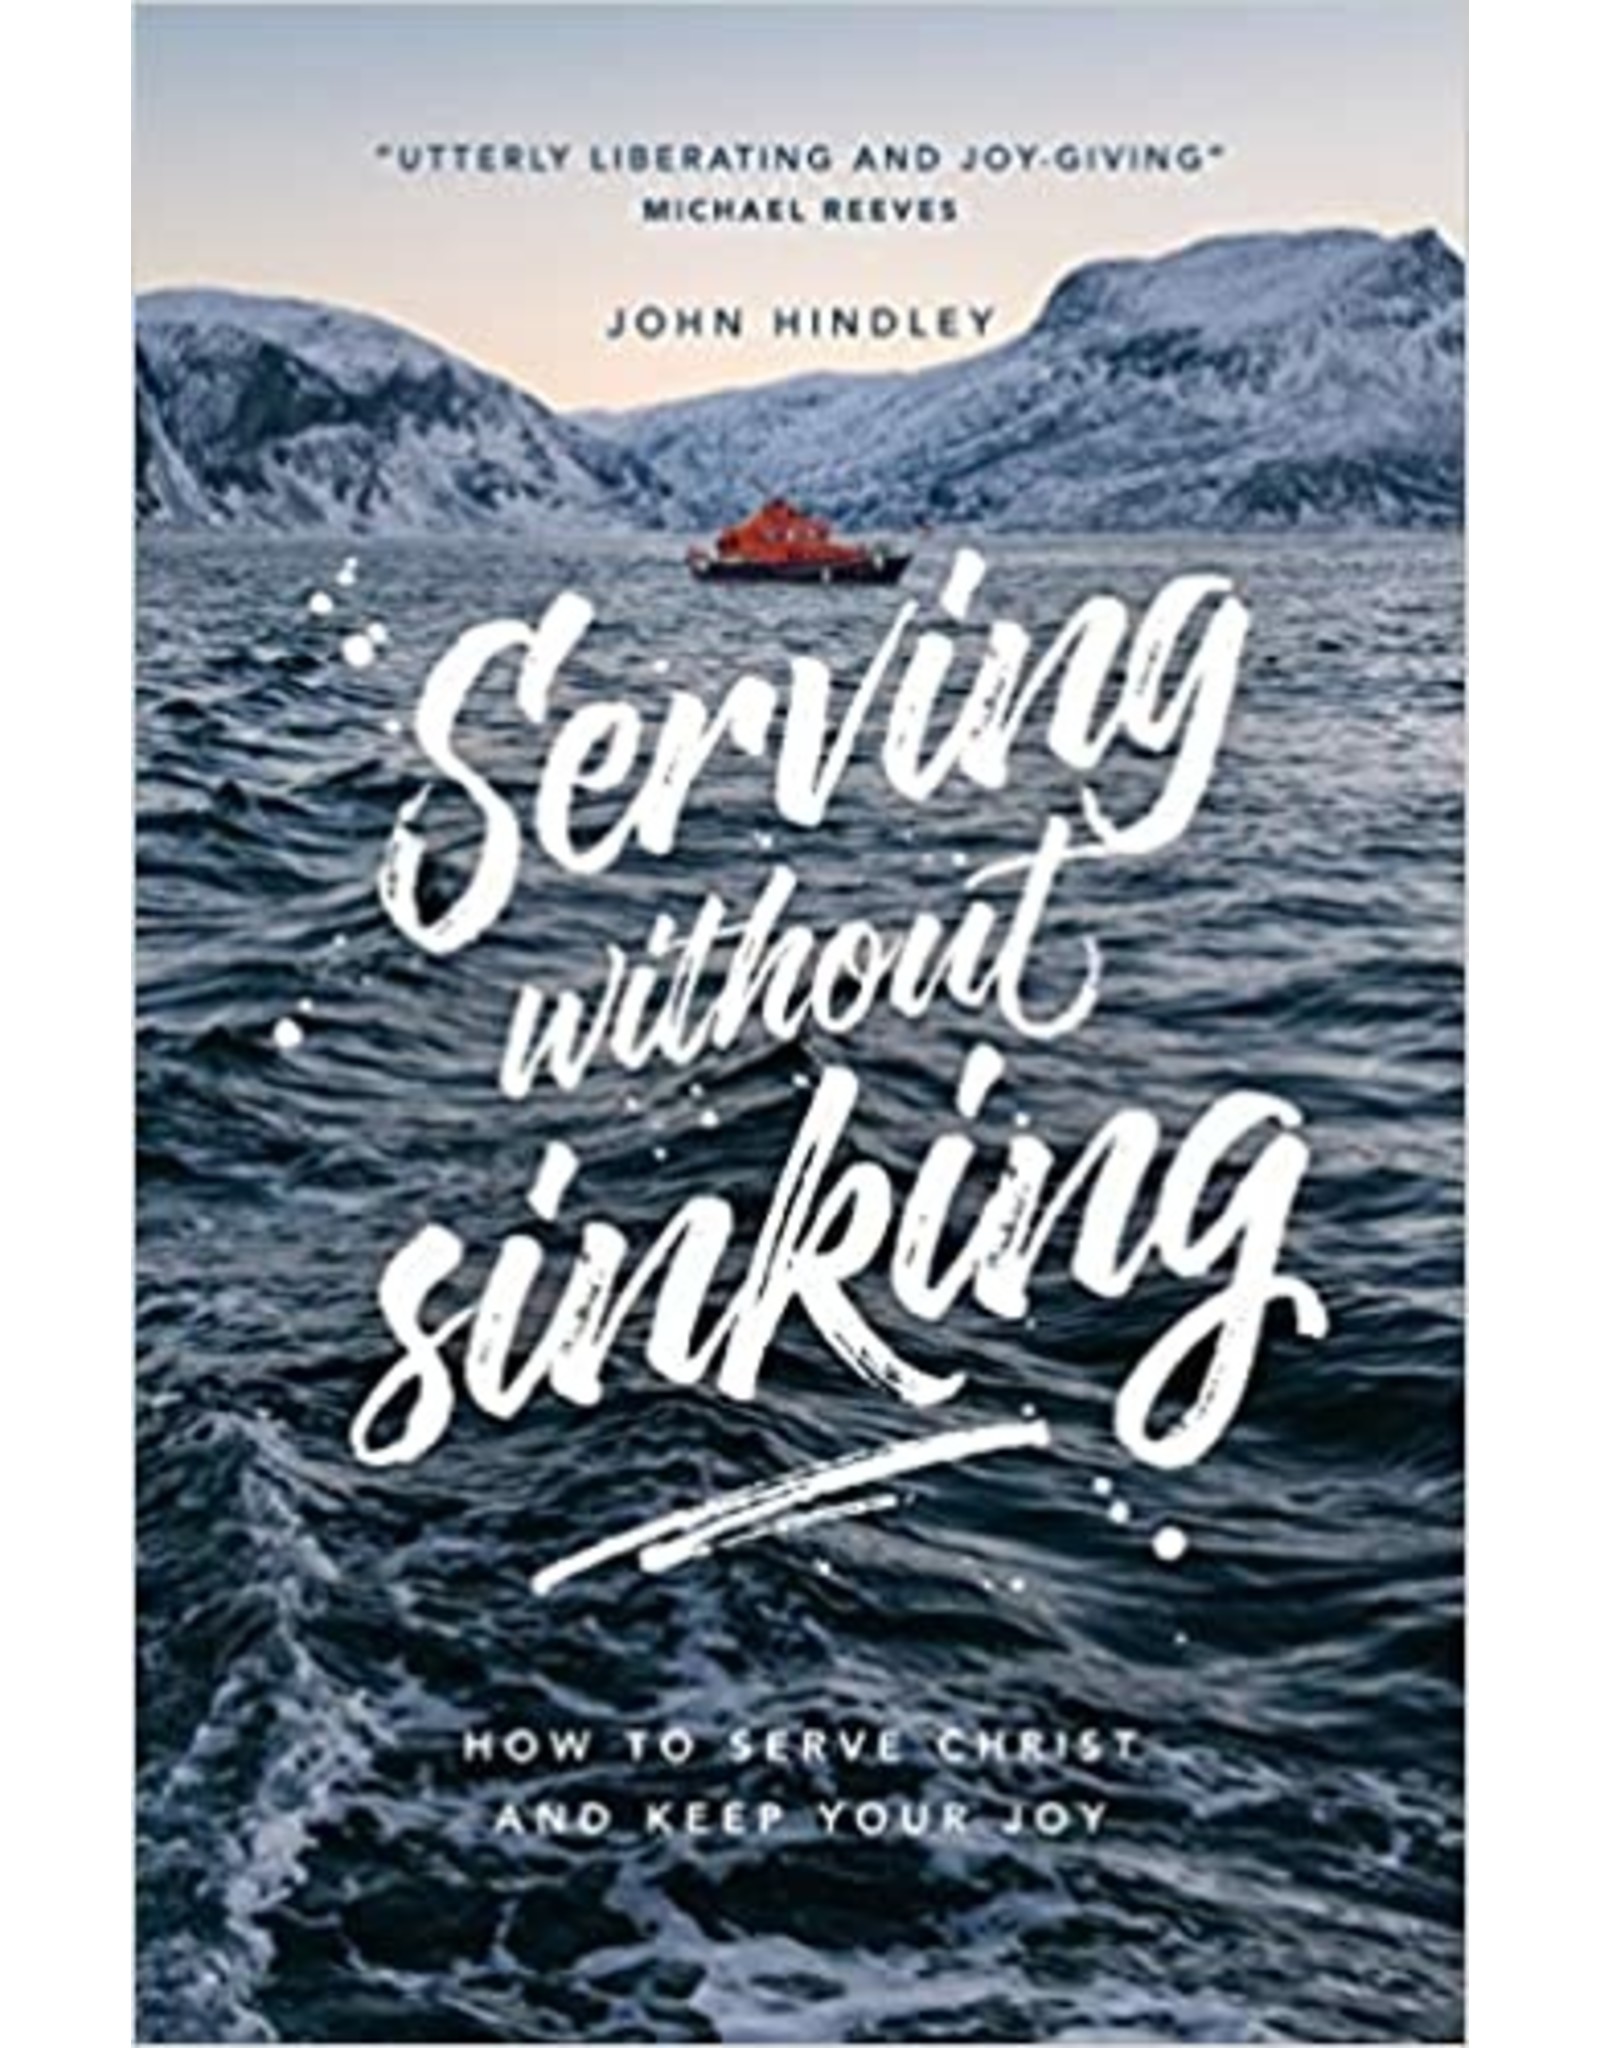 John Hindley Serving Without Sinking